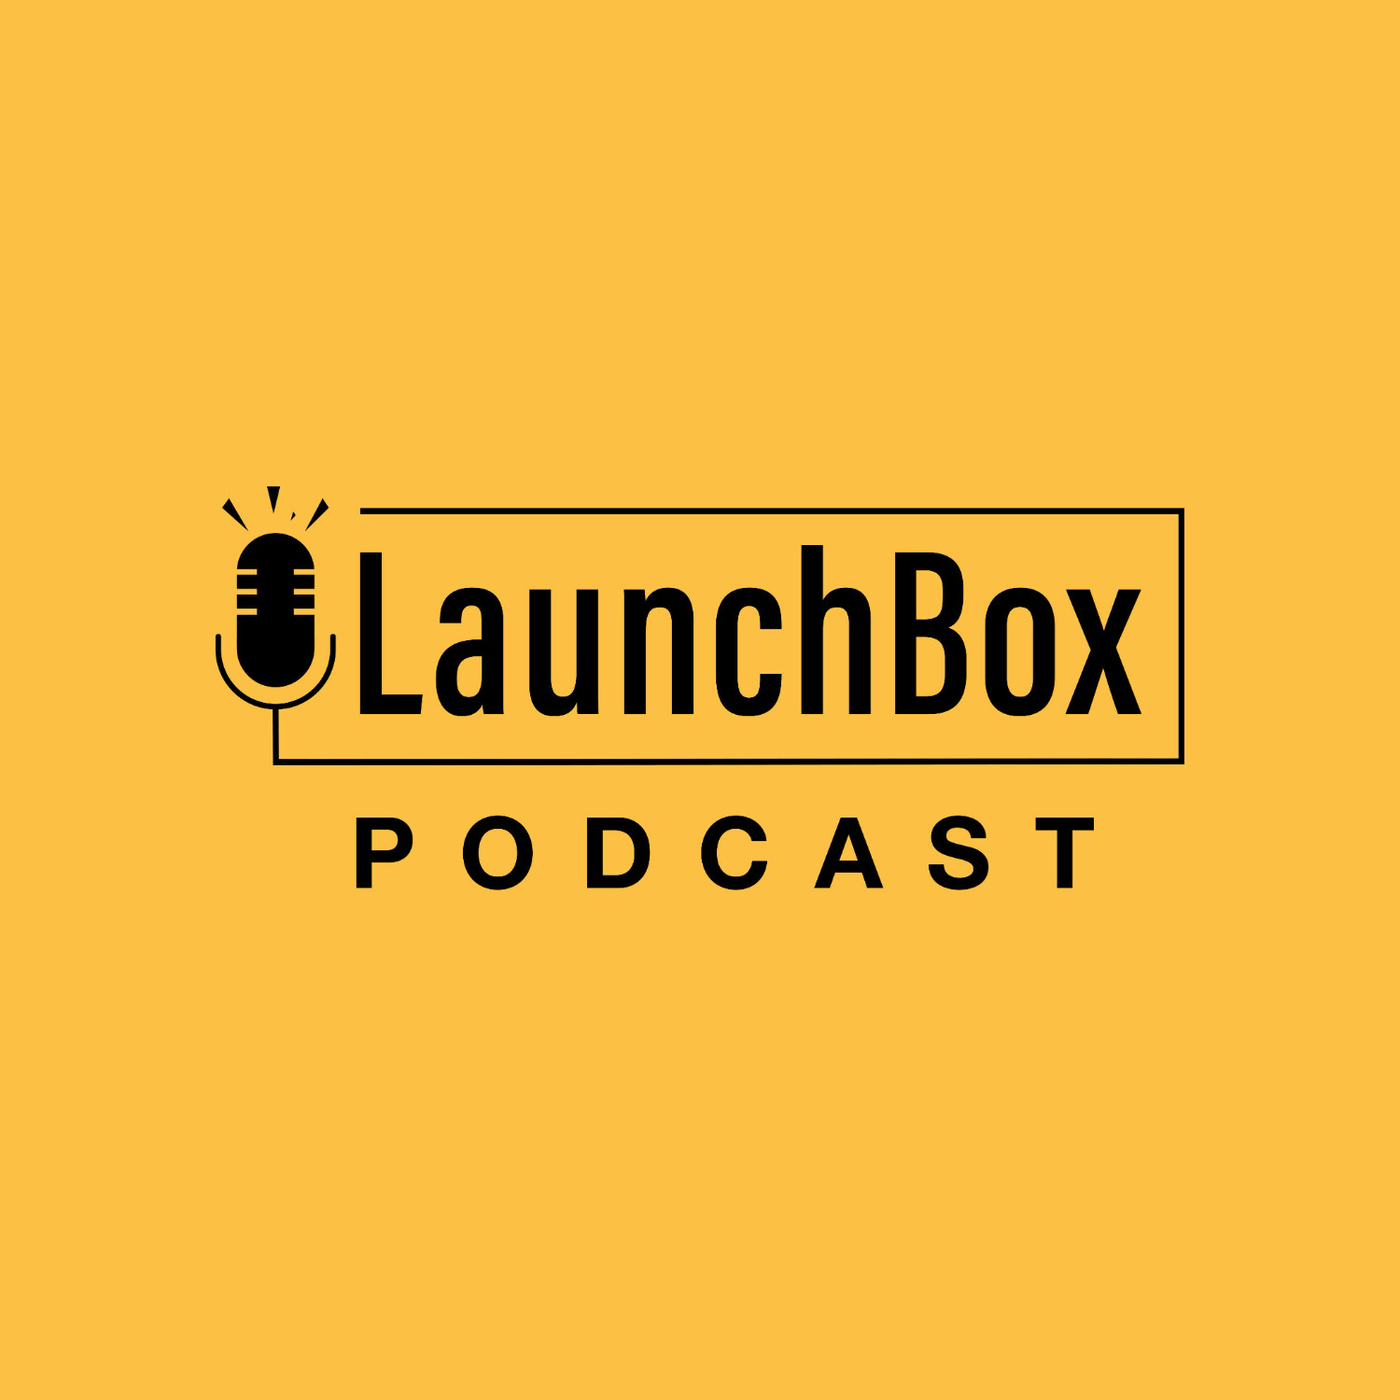 About LaunchBox